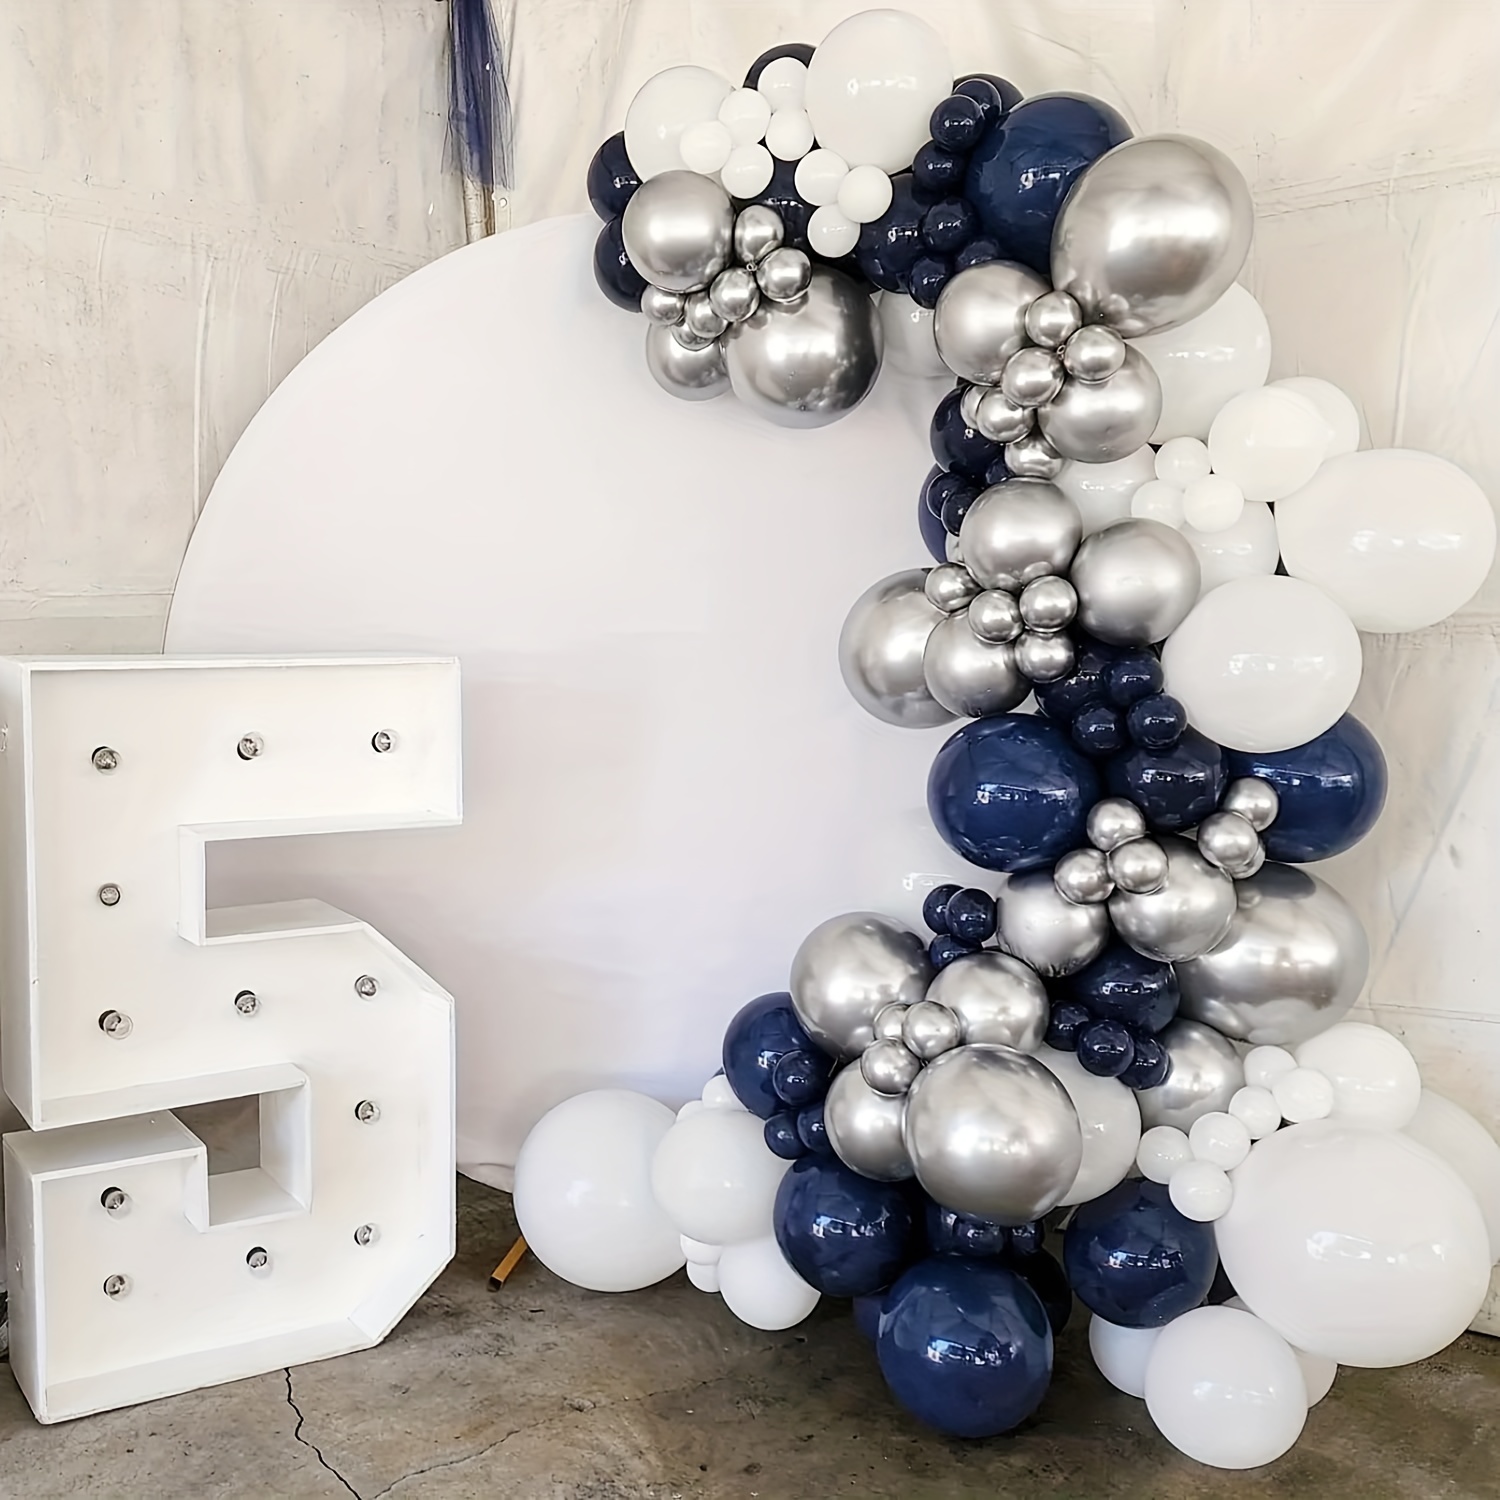 45th male red, black, silver themed birthday party - Google Search  White  party decorations, Birthday party decorations, 40th birthday parties